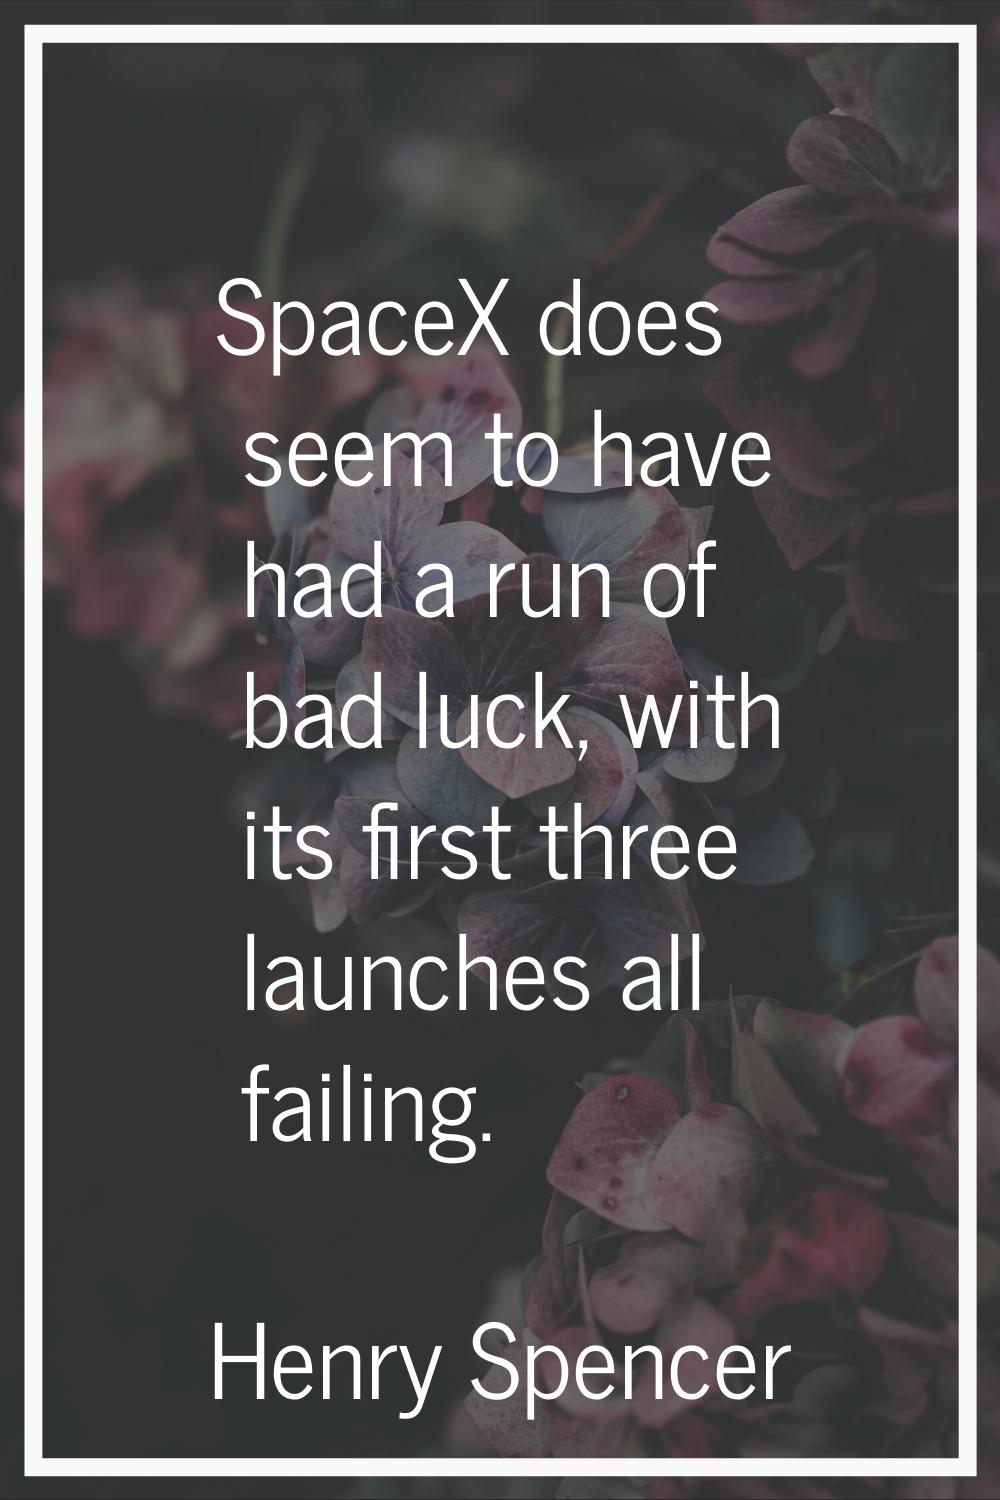 SpaceX does seem to have had a run of bad luck, with its first three launches all failing.